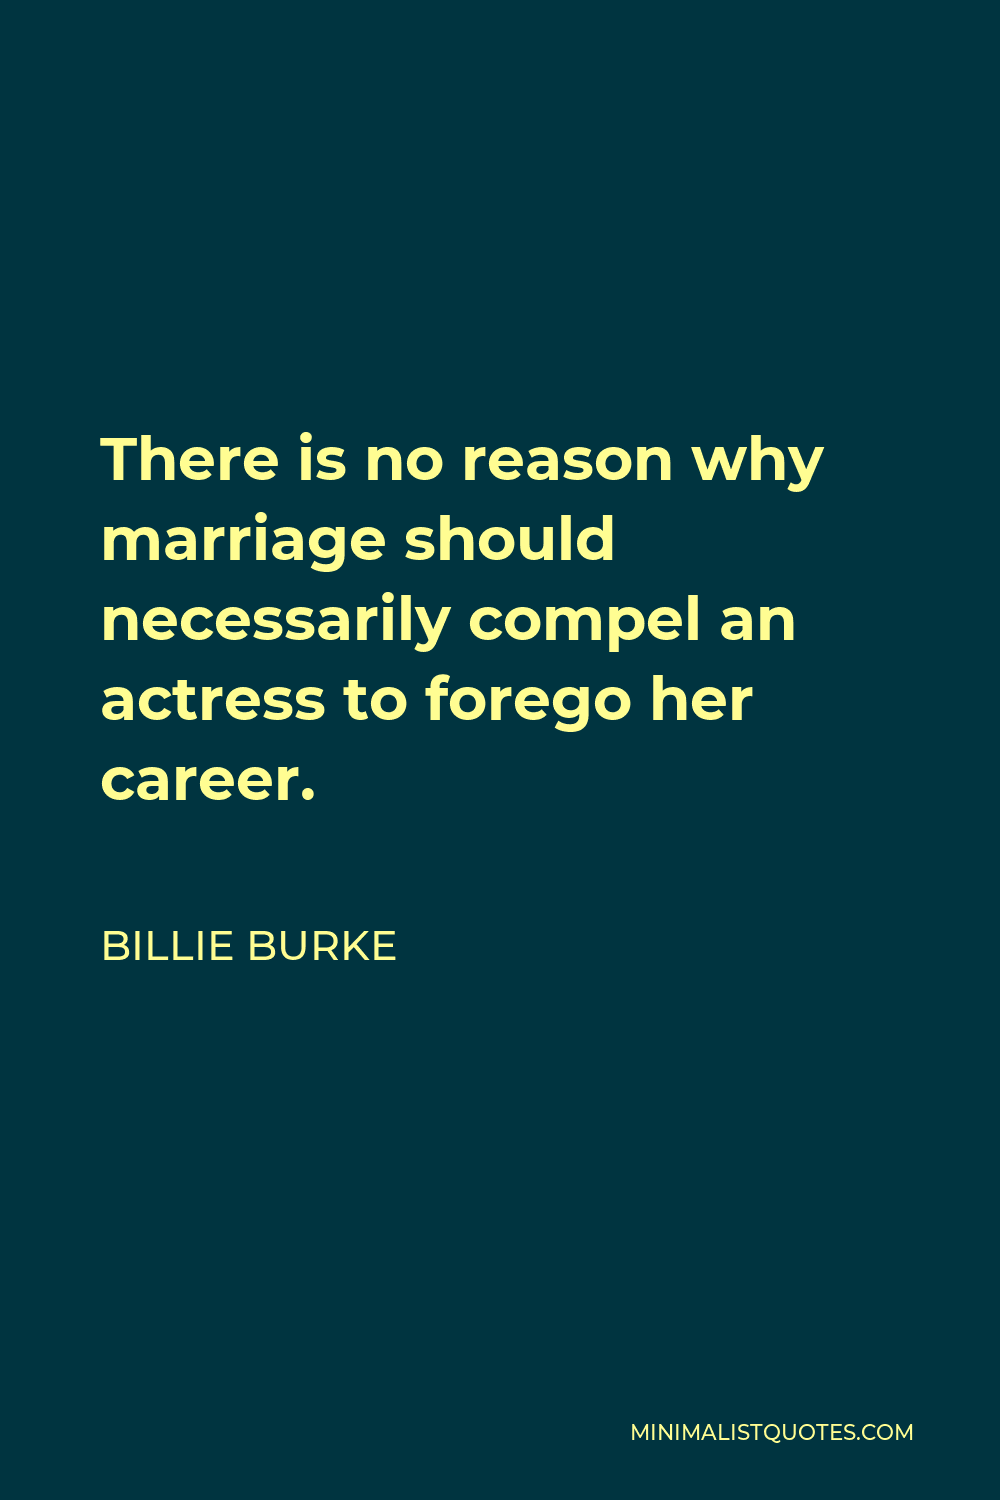 Billie Burke Quote - There is no reason why marriage should necessarily compel an actress to forego her career.